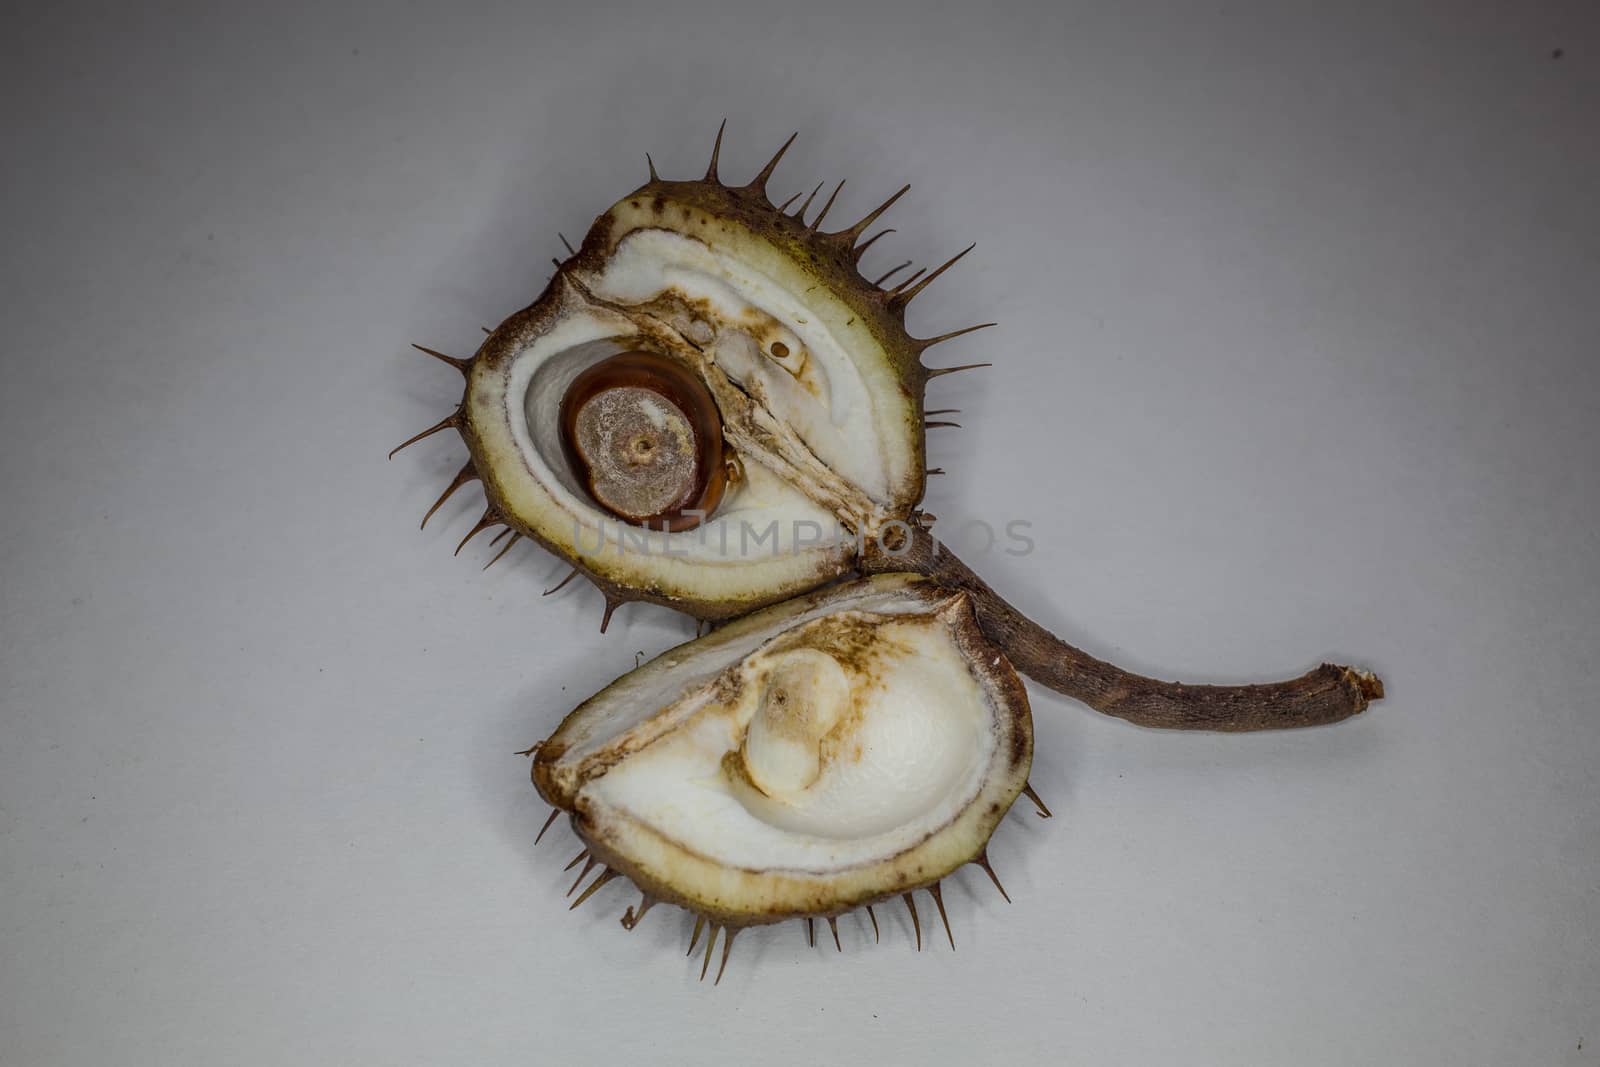 Chestnuts with a spiky pericarp